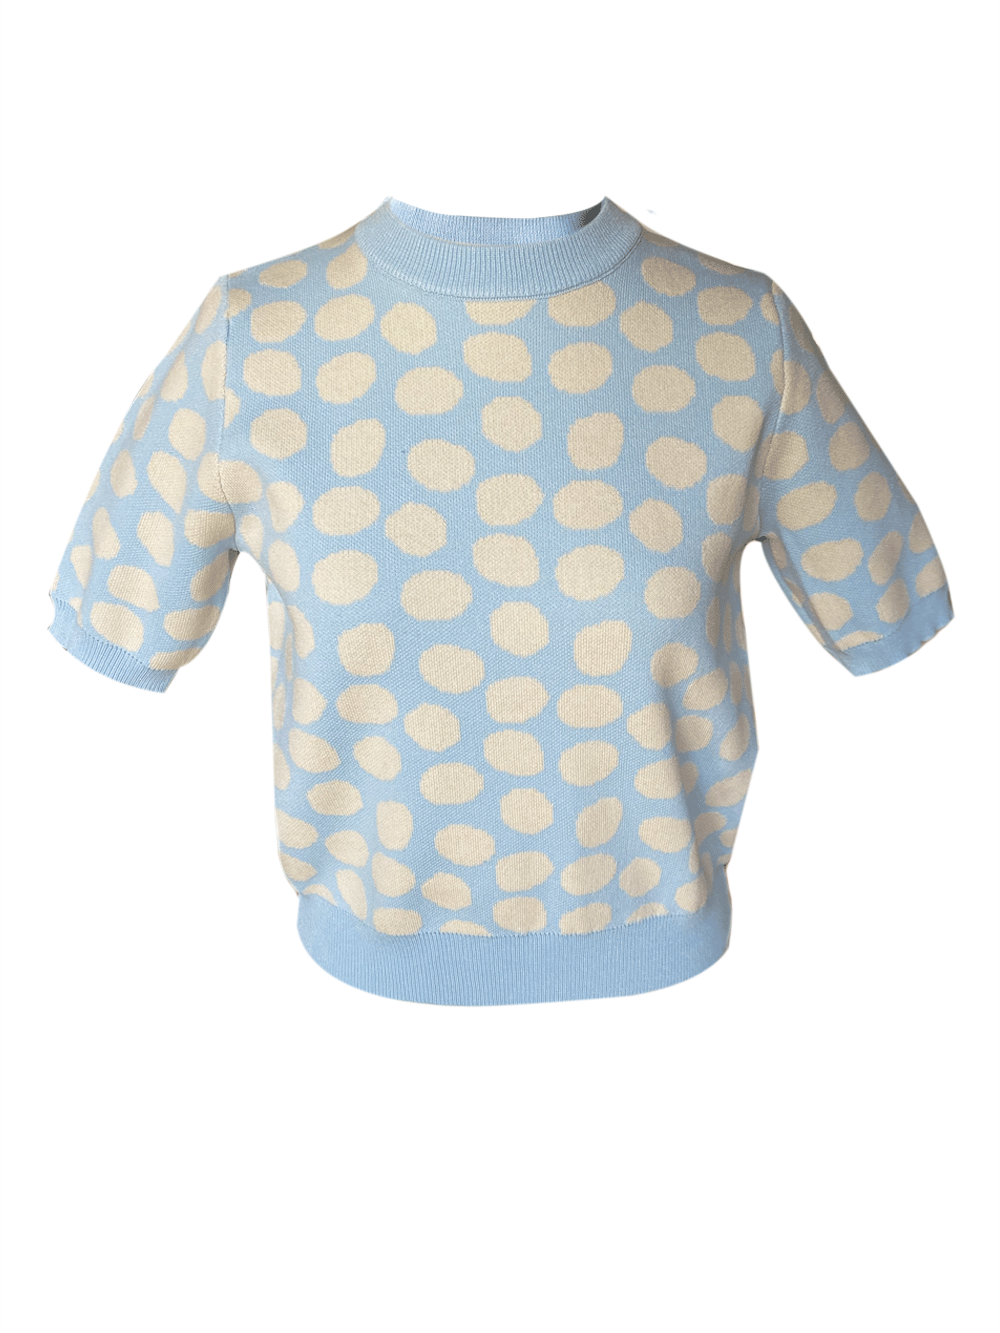 COMPANIA FANTASTICA baby blue dotted sweater S